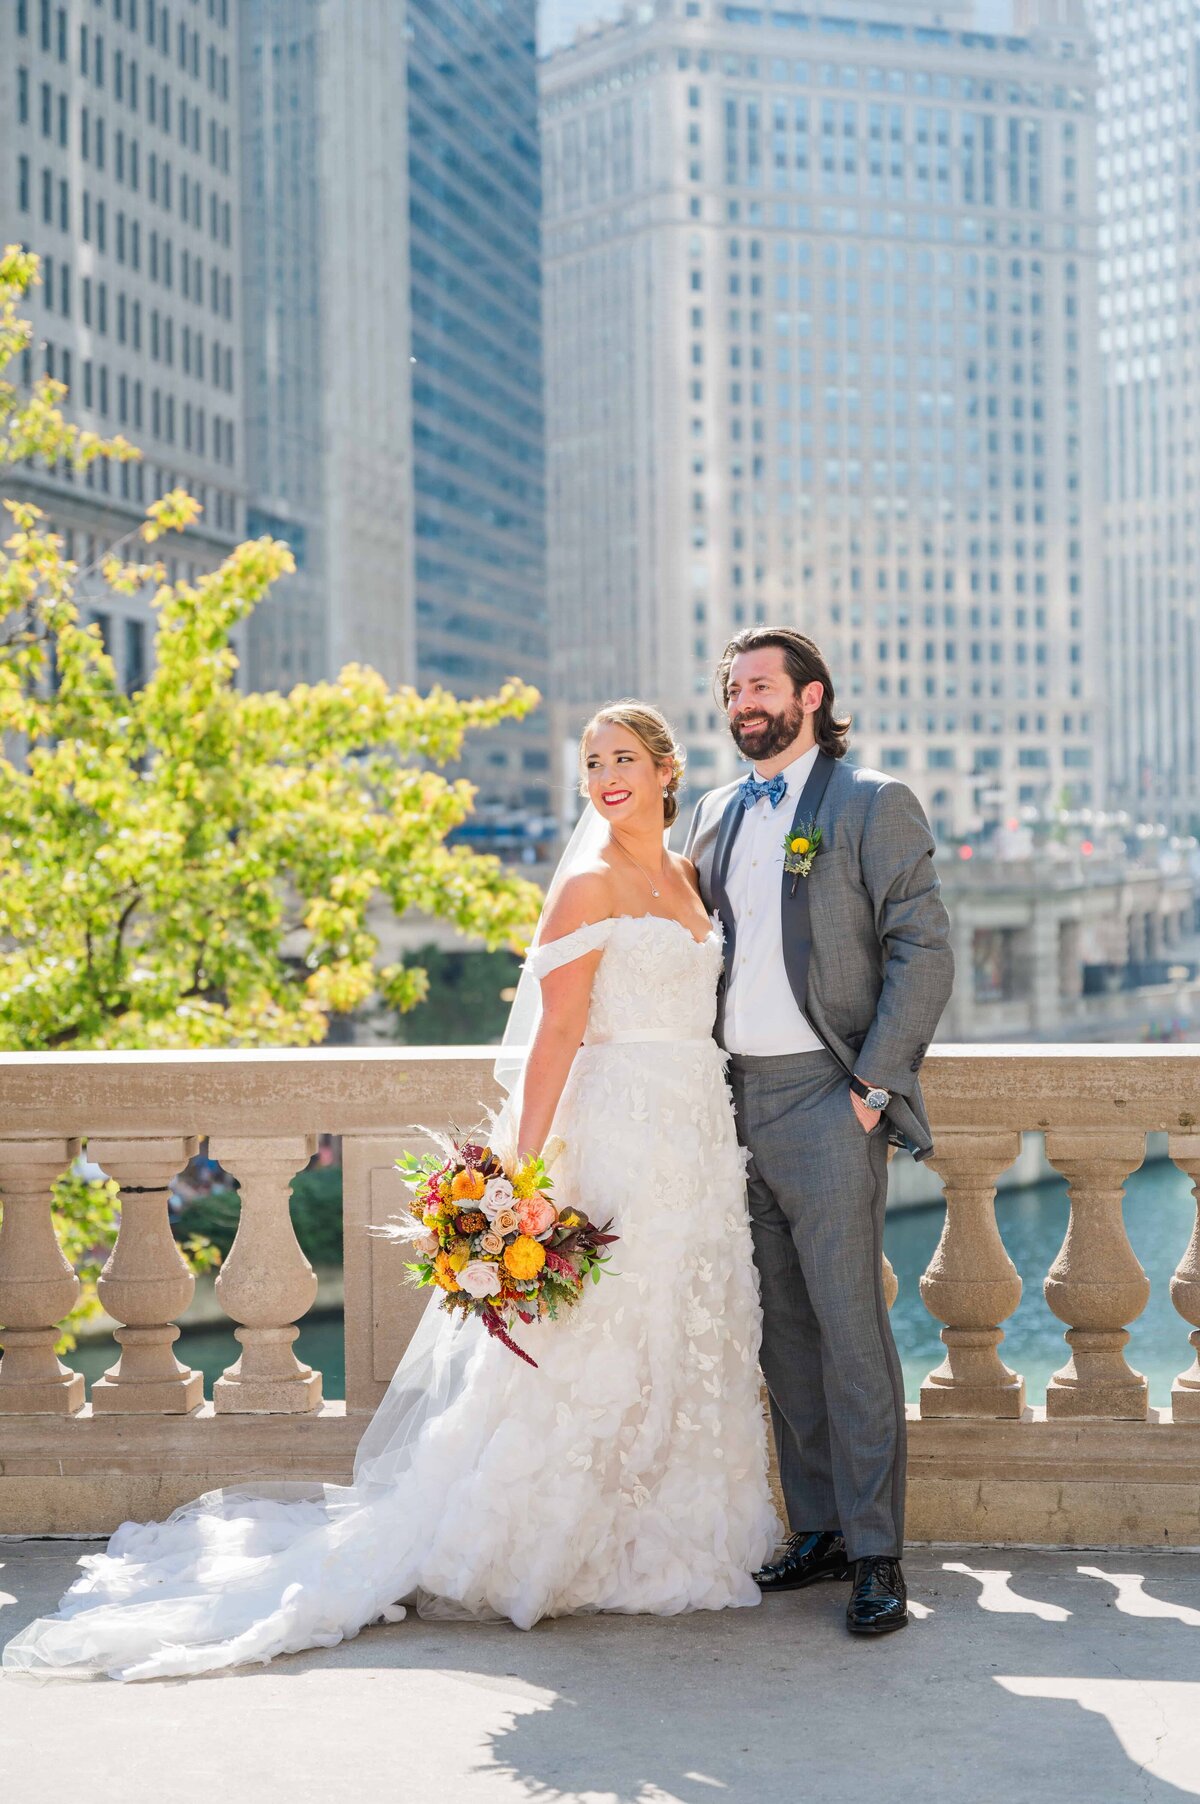 Bride and Groom in downtown Chicago.